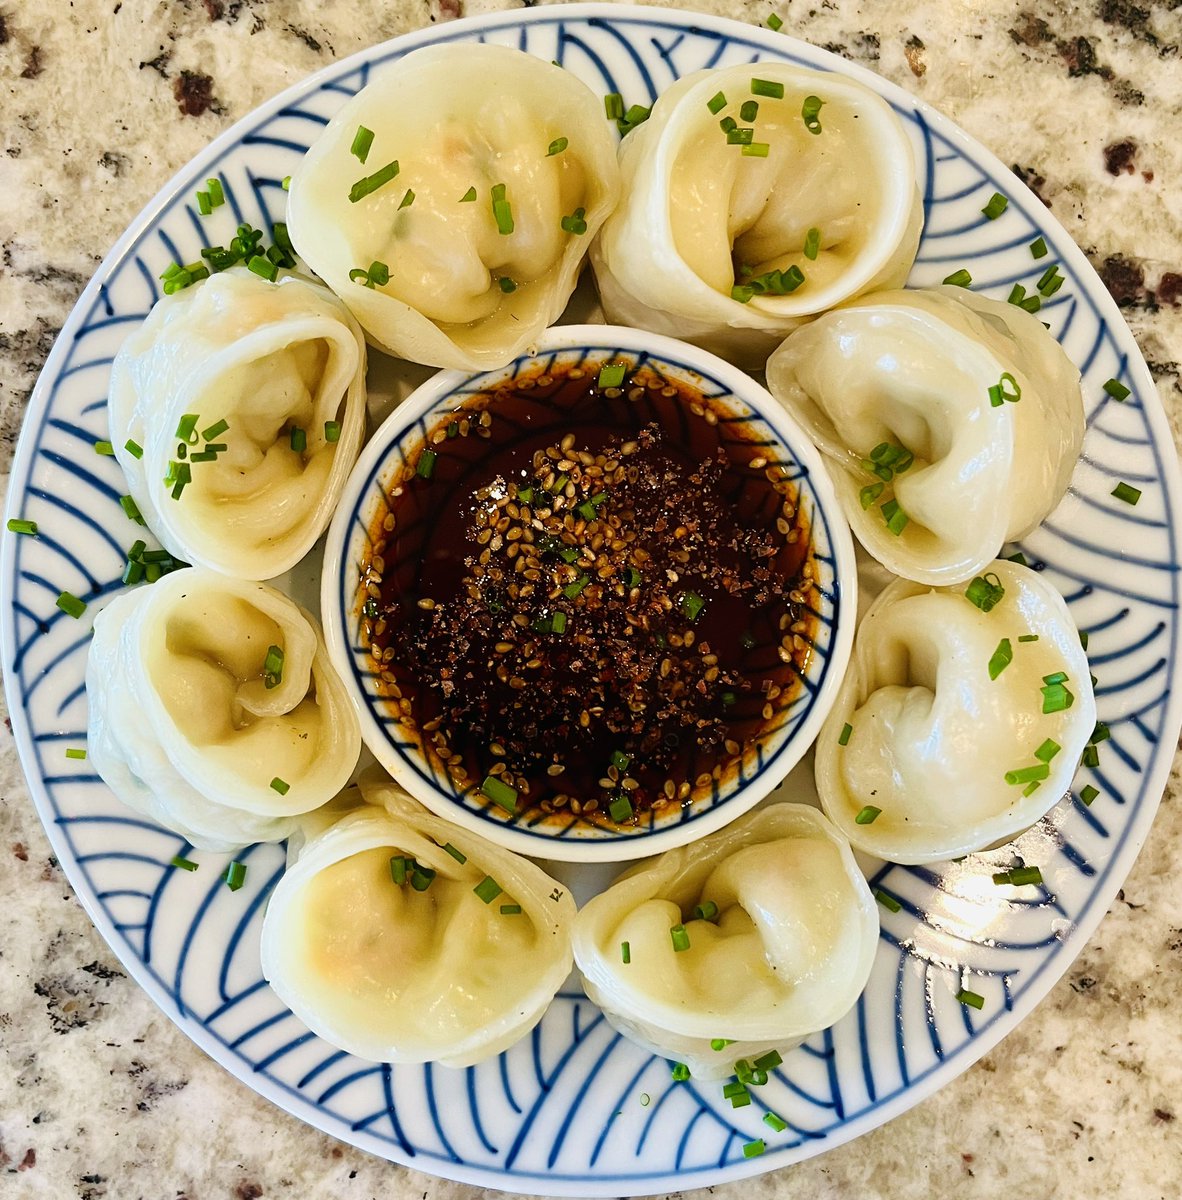 Mandu (or Korean dumplings)! These were filled with ground chicken, vegetables and ginger. The sauce is a mix of soy, sesame, rice vinegar and gochugaru (red pepper). Eight may not be enough. #Food #Foodie #FridayFeeling